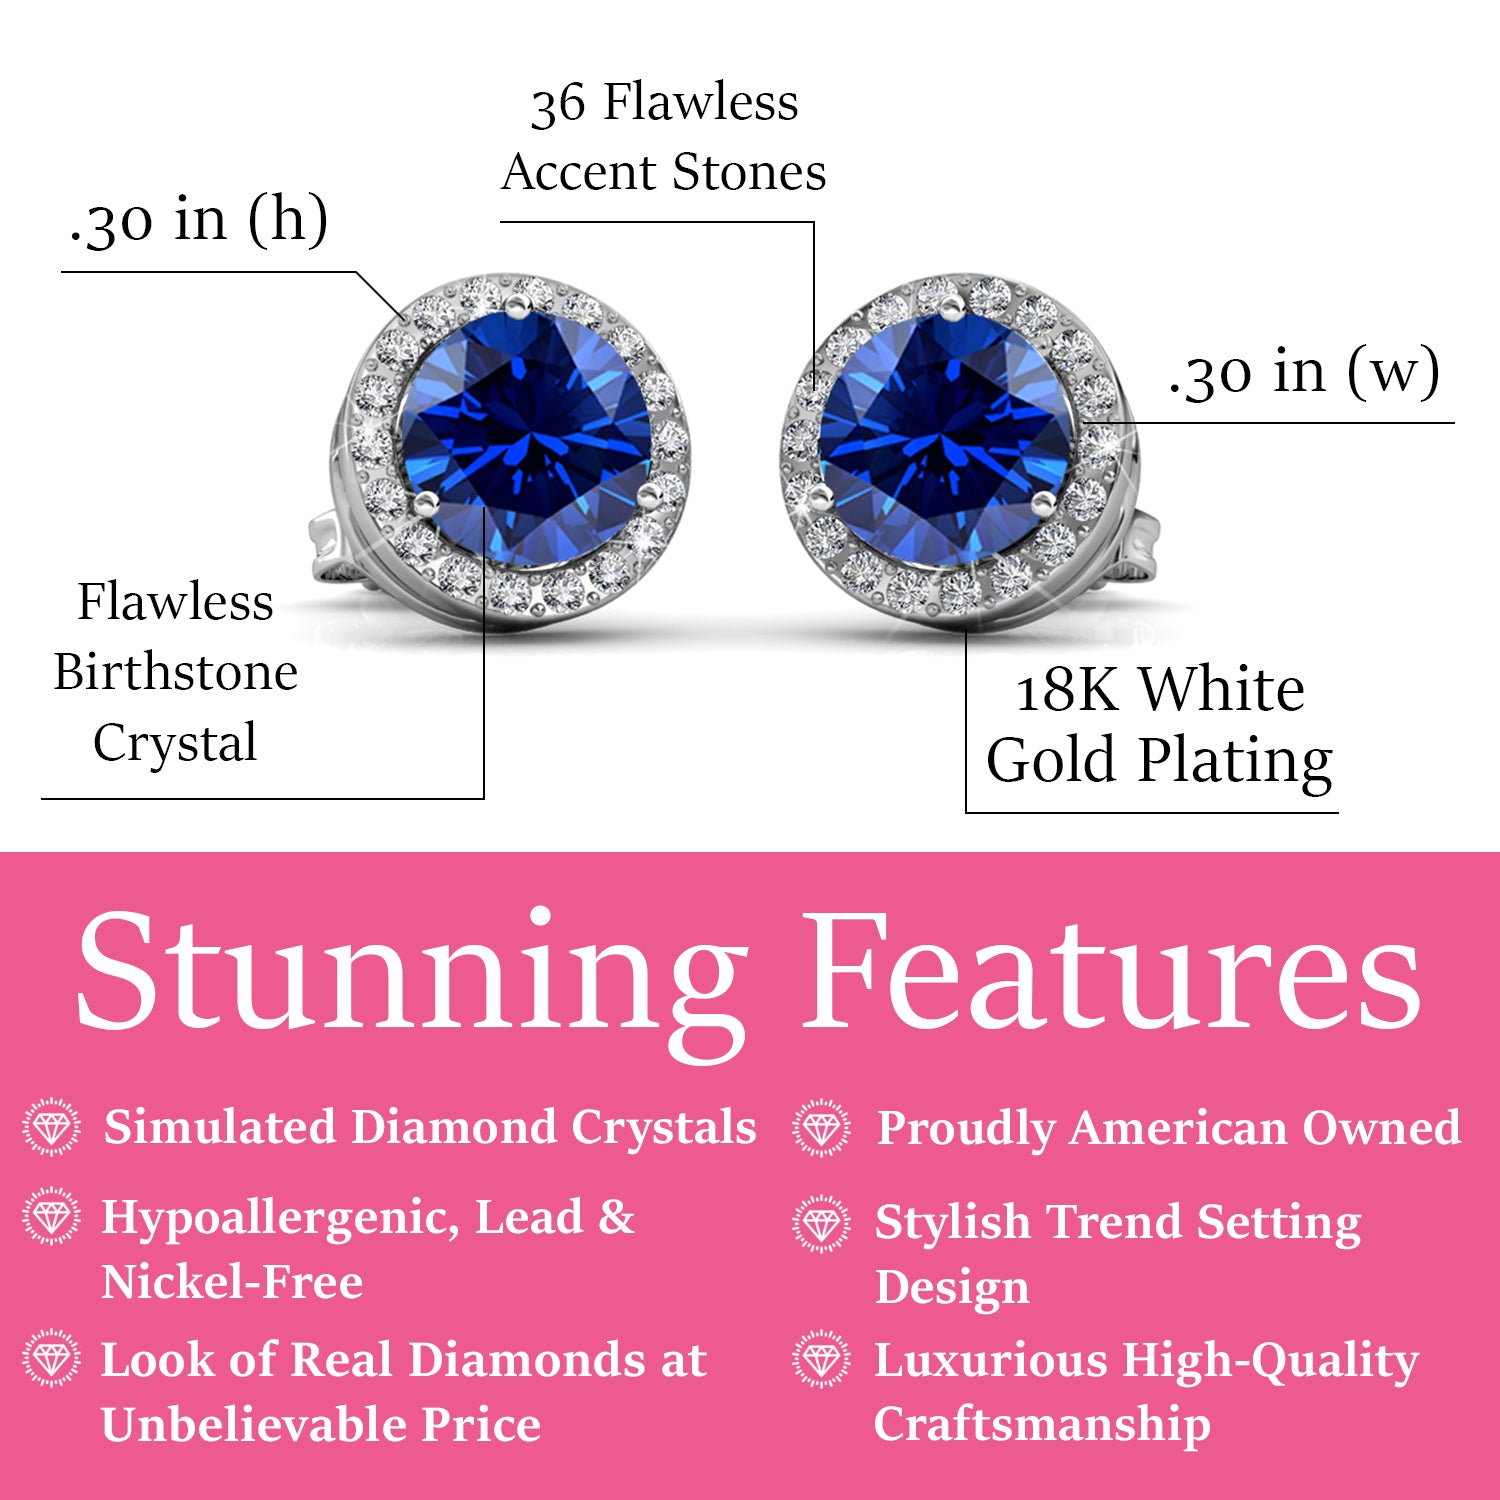 Royal September Birthstone Sapphire Earrings, 18k White Gold Plated Silver Halo Earrings with Round Cut Crystals